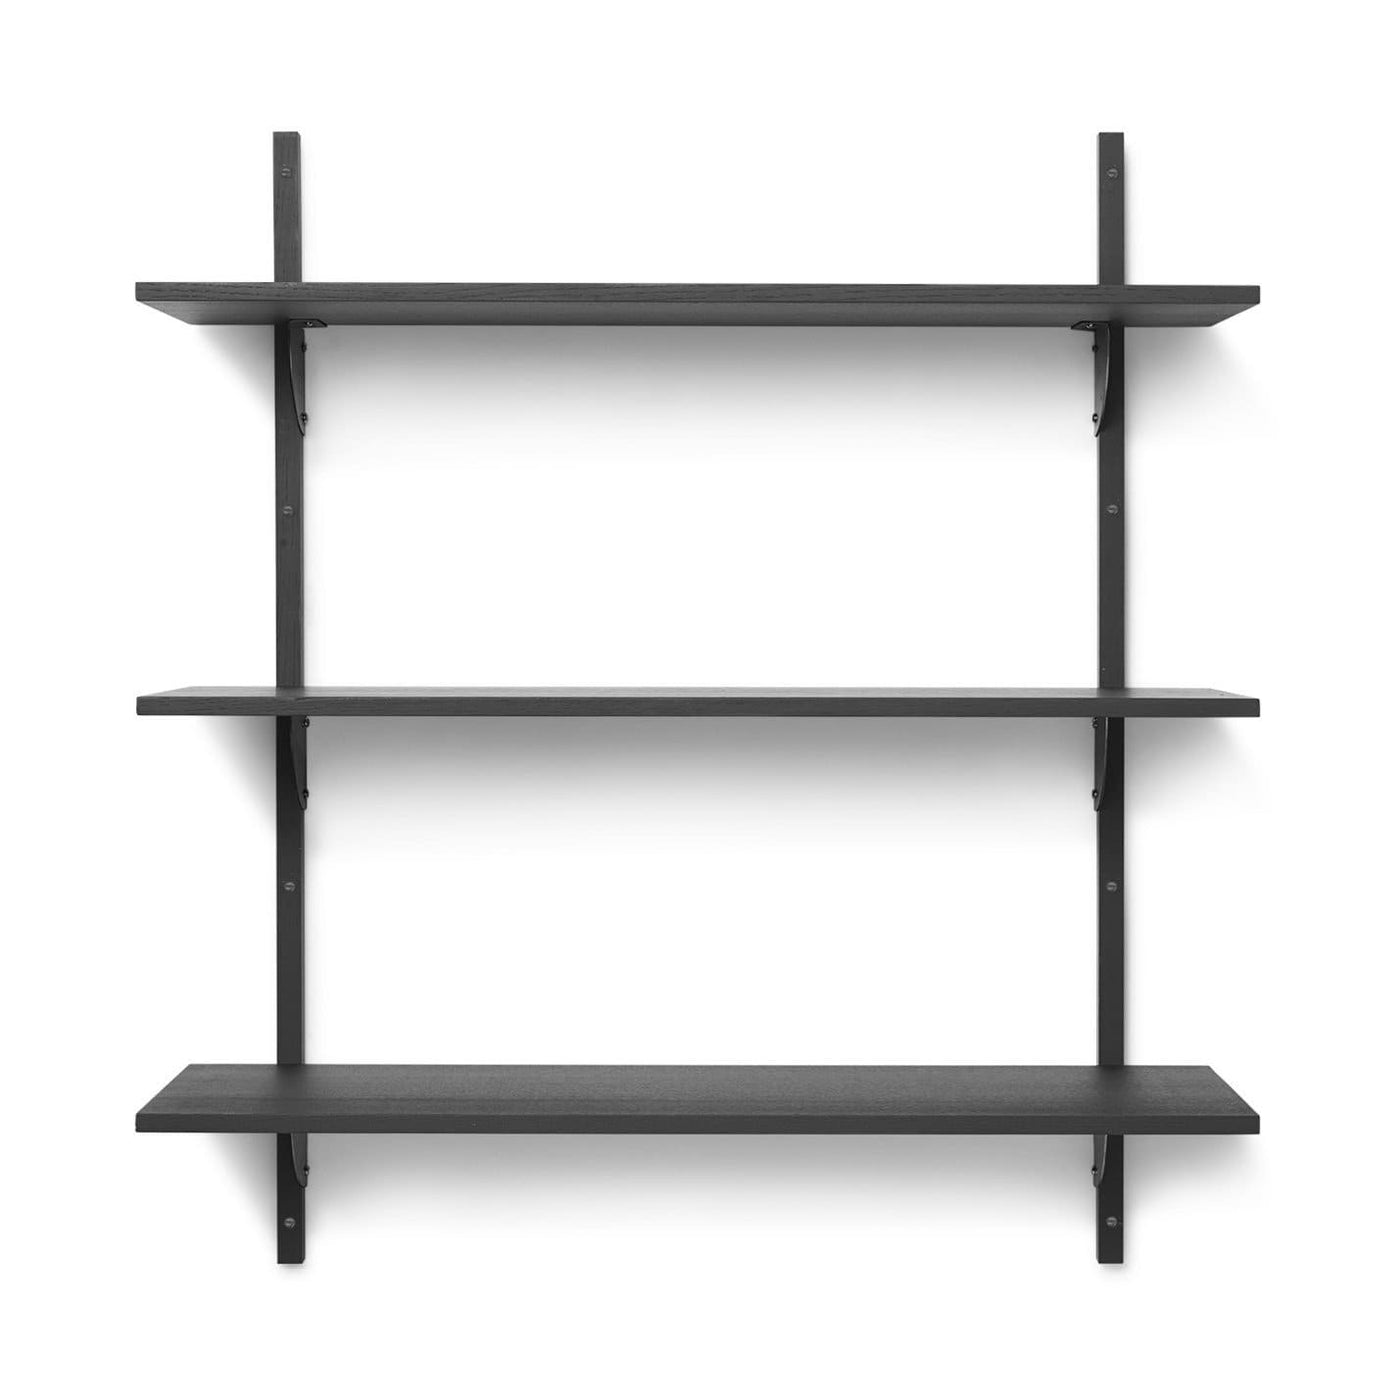 Ferm Living Sector Shelf triple wide in black ash with blackened brass brackets. Available from someday designs 